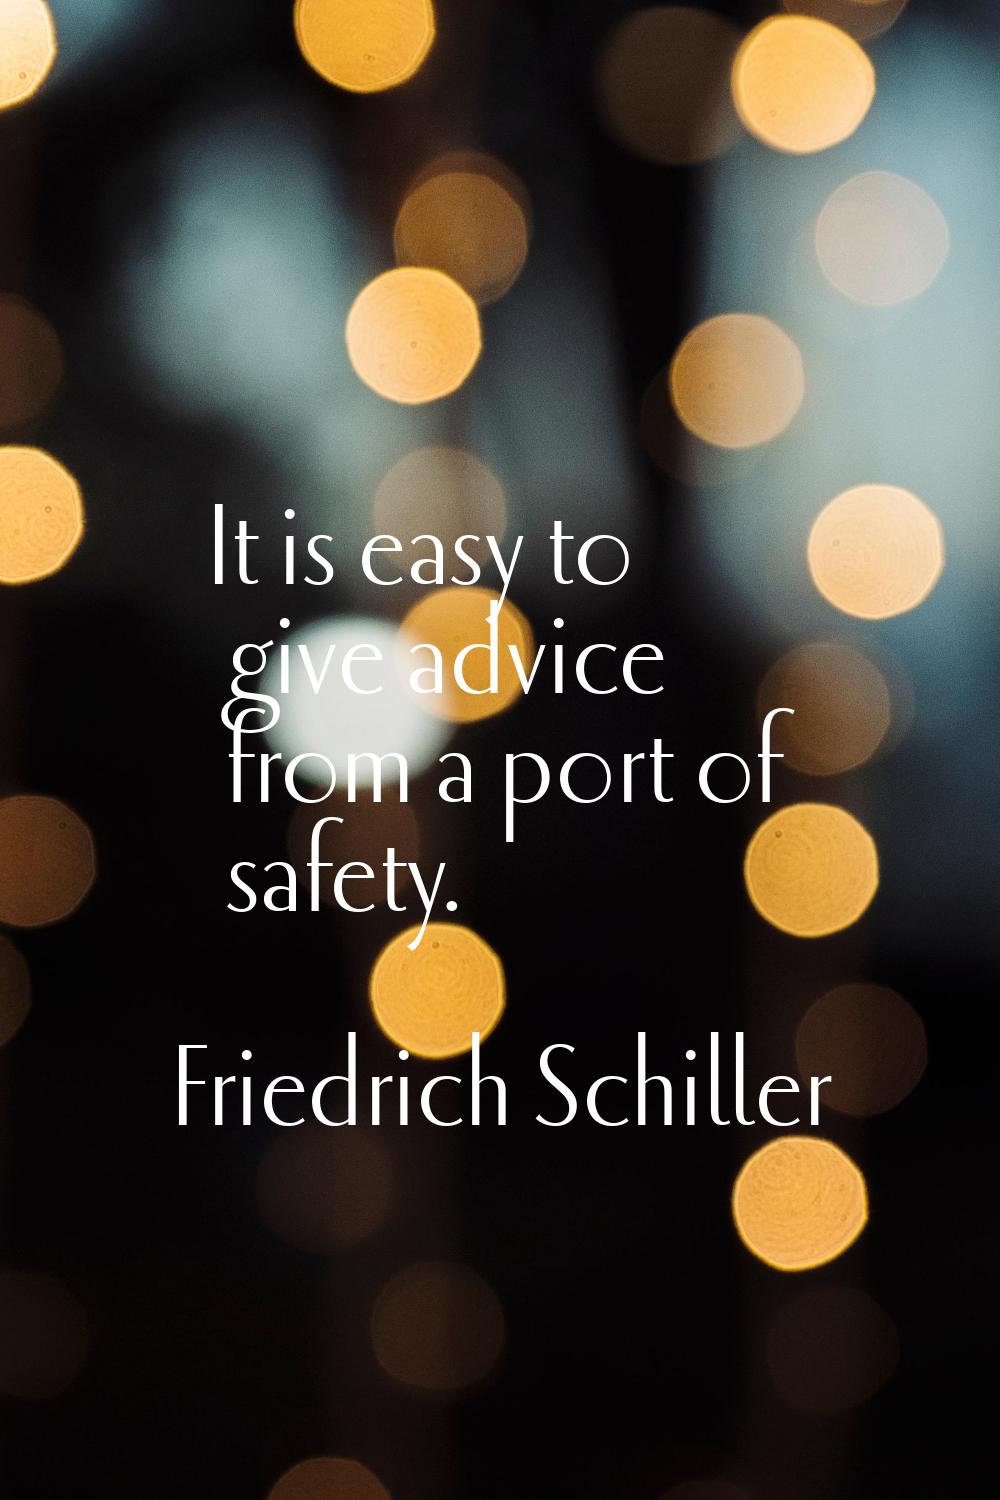 It is easy to give advice from a port of safety.